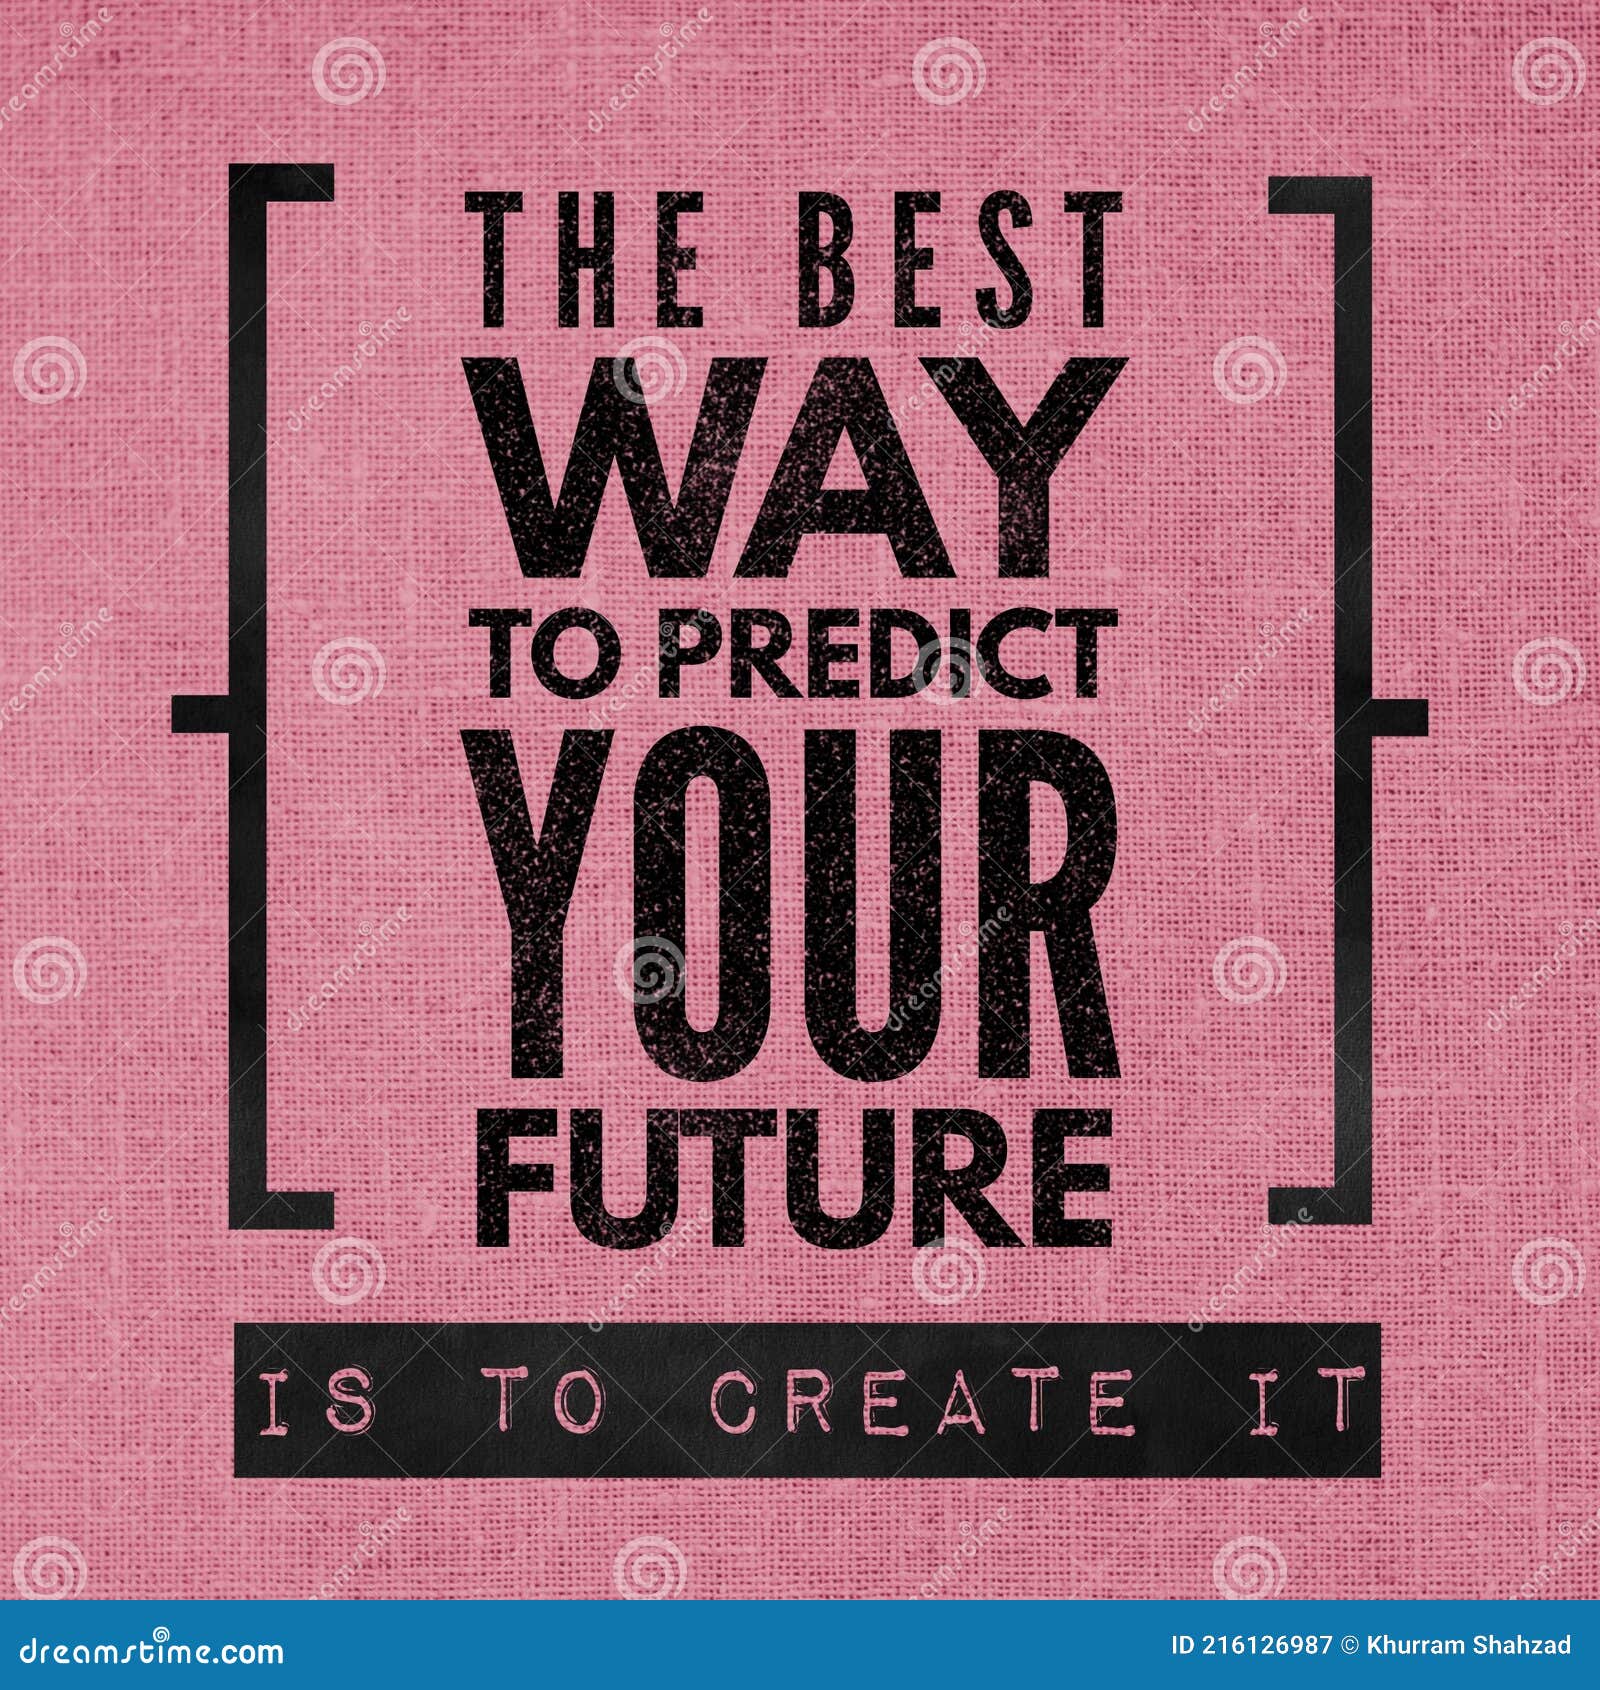 The Best Way To Predict Your Future Is To Create It Motivational And Inspirational Quote About